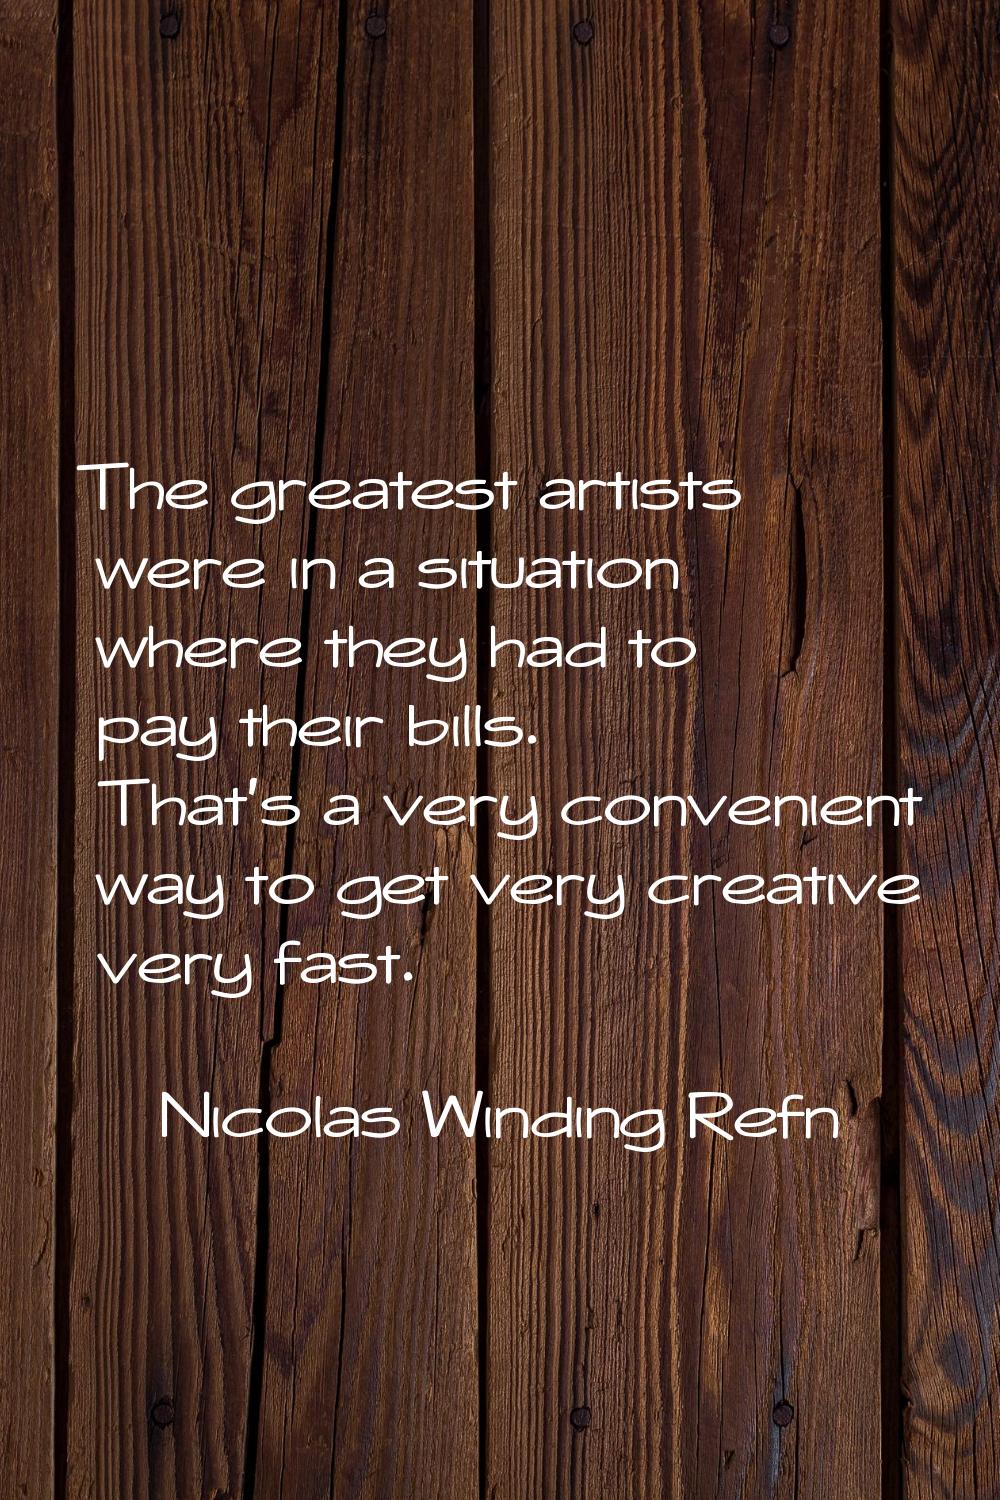 The greatest artists were in a situation where they had to pay their bills. That's a very convenien